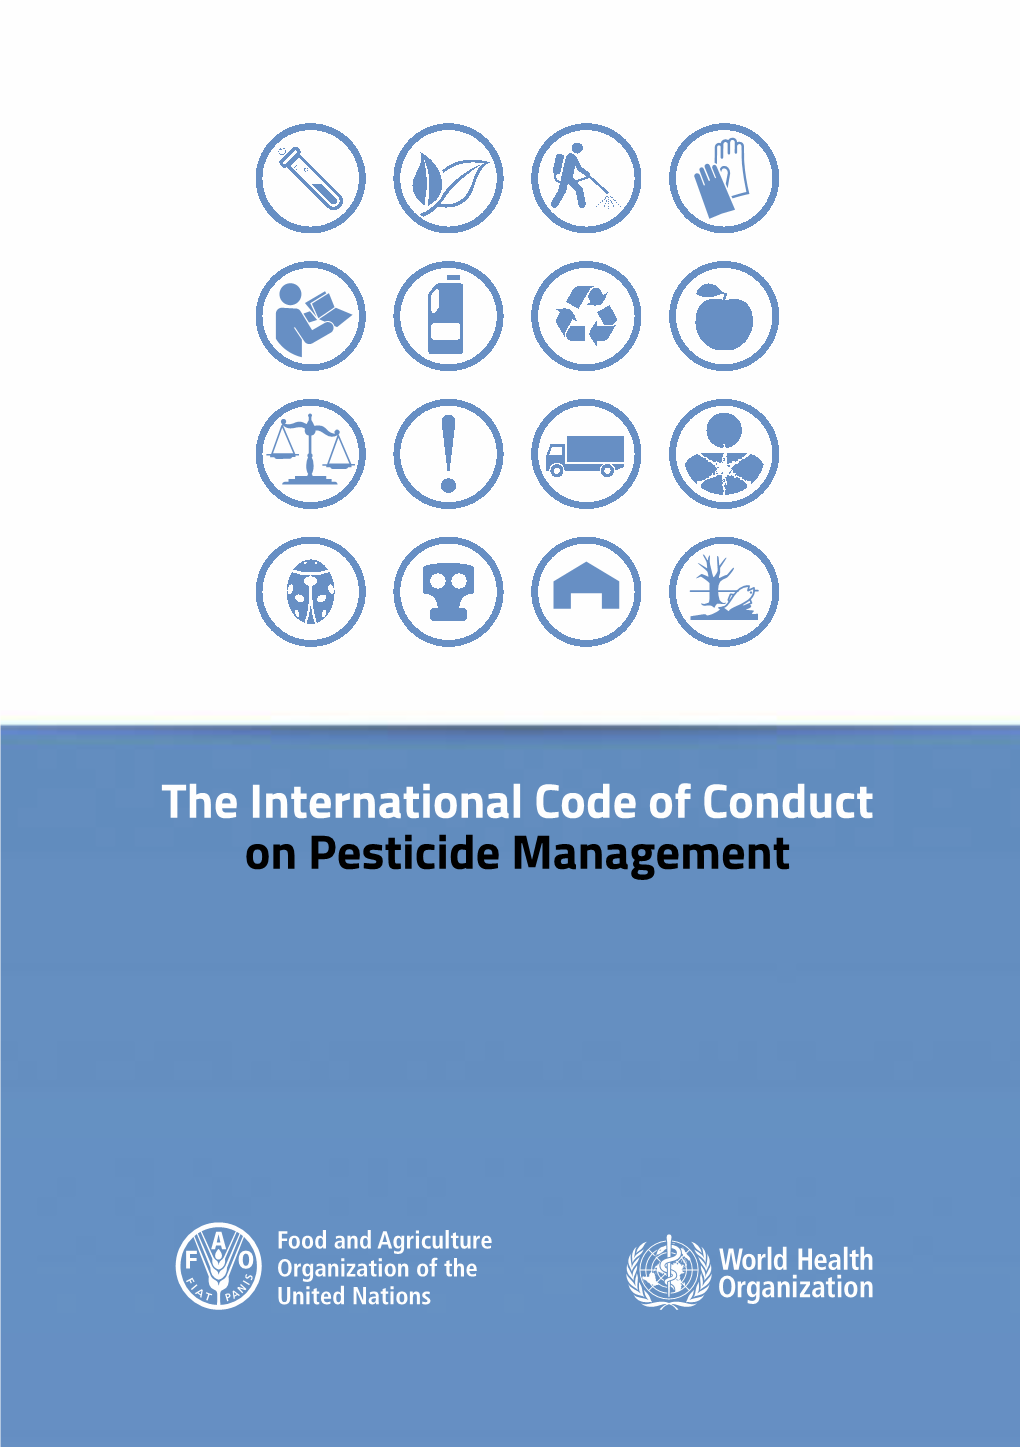 The International Code of Conduct on Pesticide Management